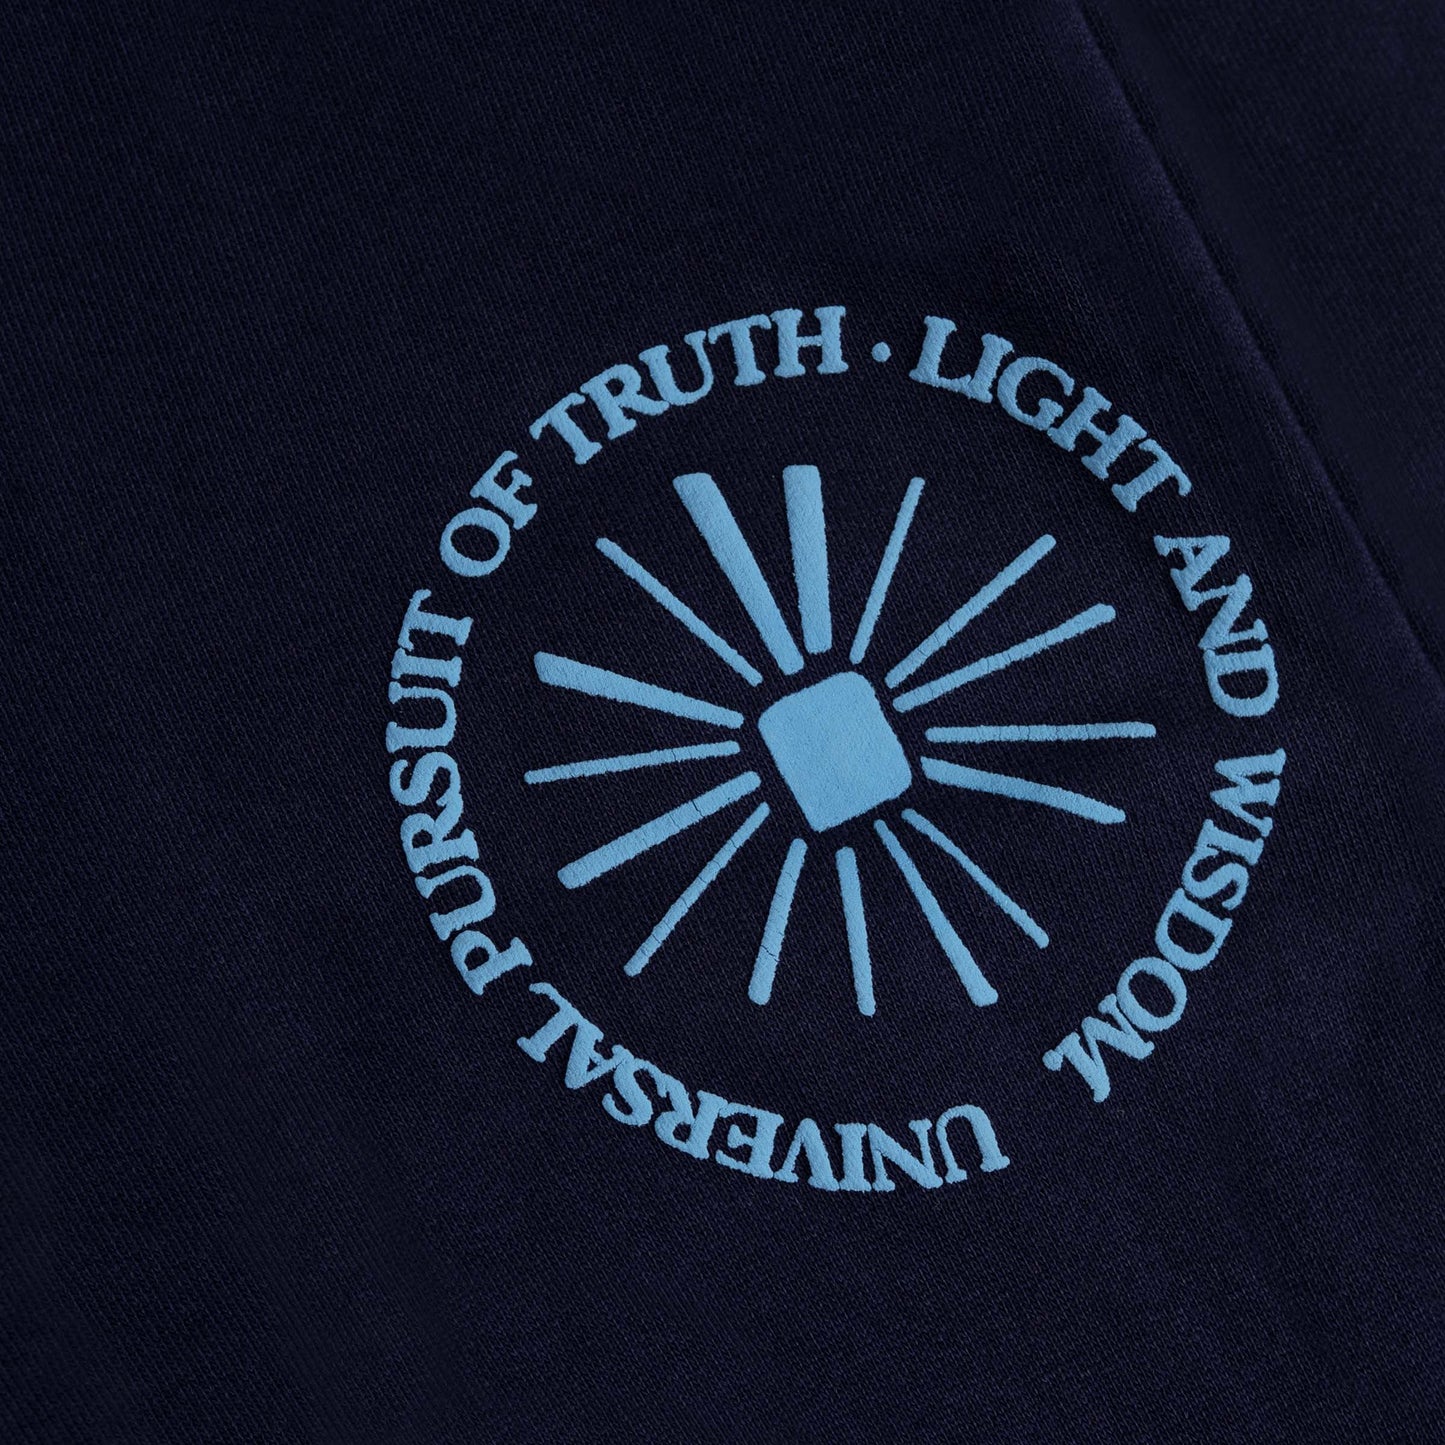 DETAIL VIEW OF UNIVERSAL PURSUIT TRUTH, LIGHT, AND WISDOM TEXT GRAPHIC